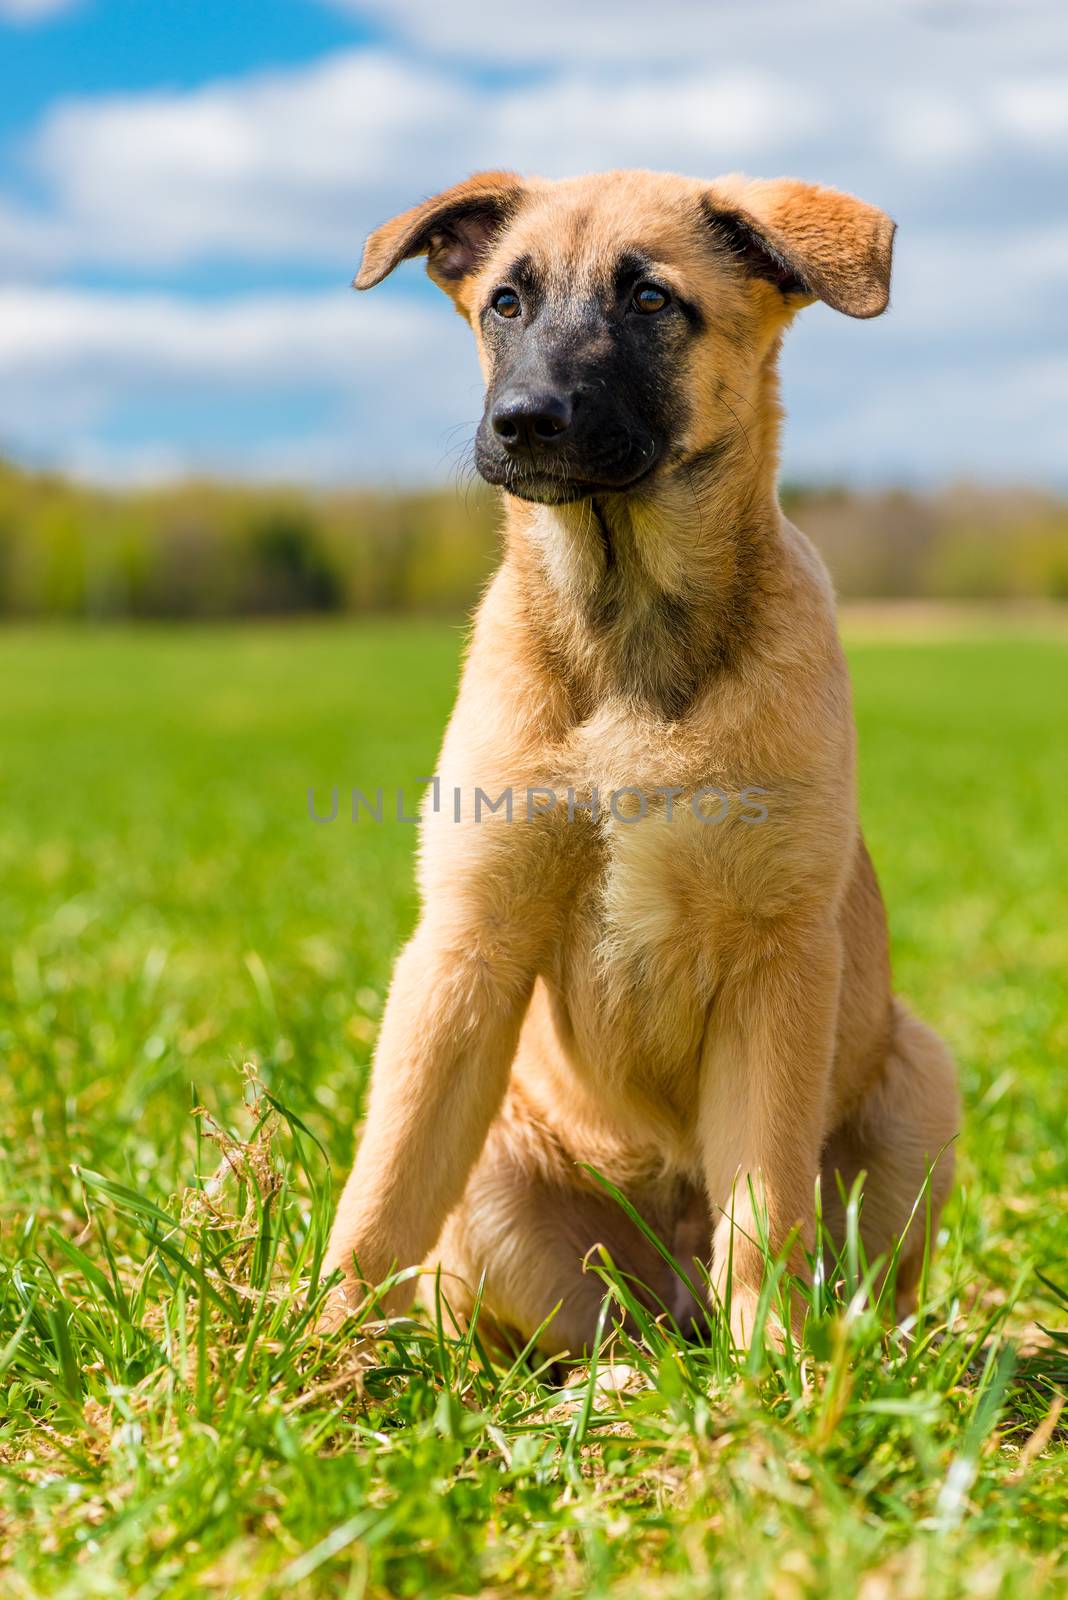 portrait of a puppy sitting on a green lawn on a sunny day by kosmsos111